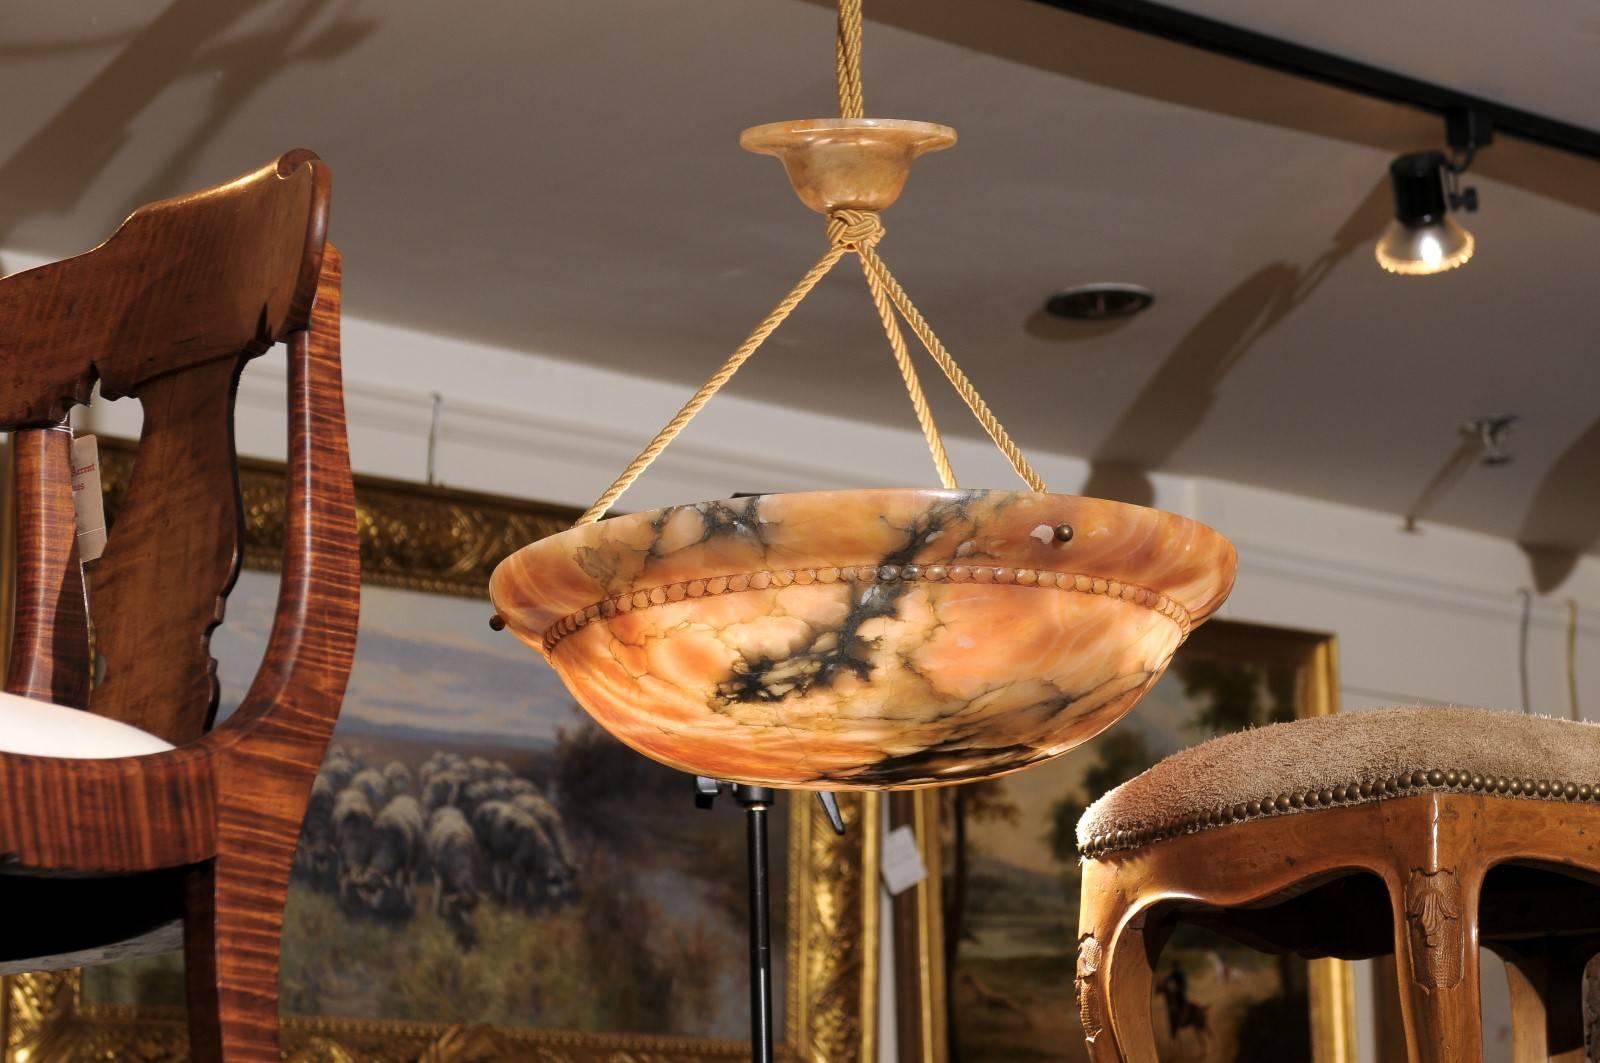 A French Art Deco alabaster light fixture from the 1930s comprising a veined alabaster campaniform bowl carved with a beaded molding, suspended by braided electrified silk cords and a matching alabaster canopy. The highly-figured alabaster polished